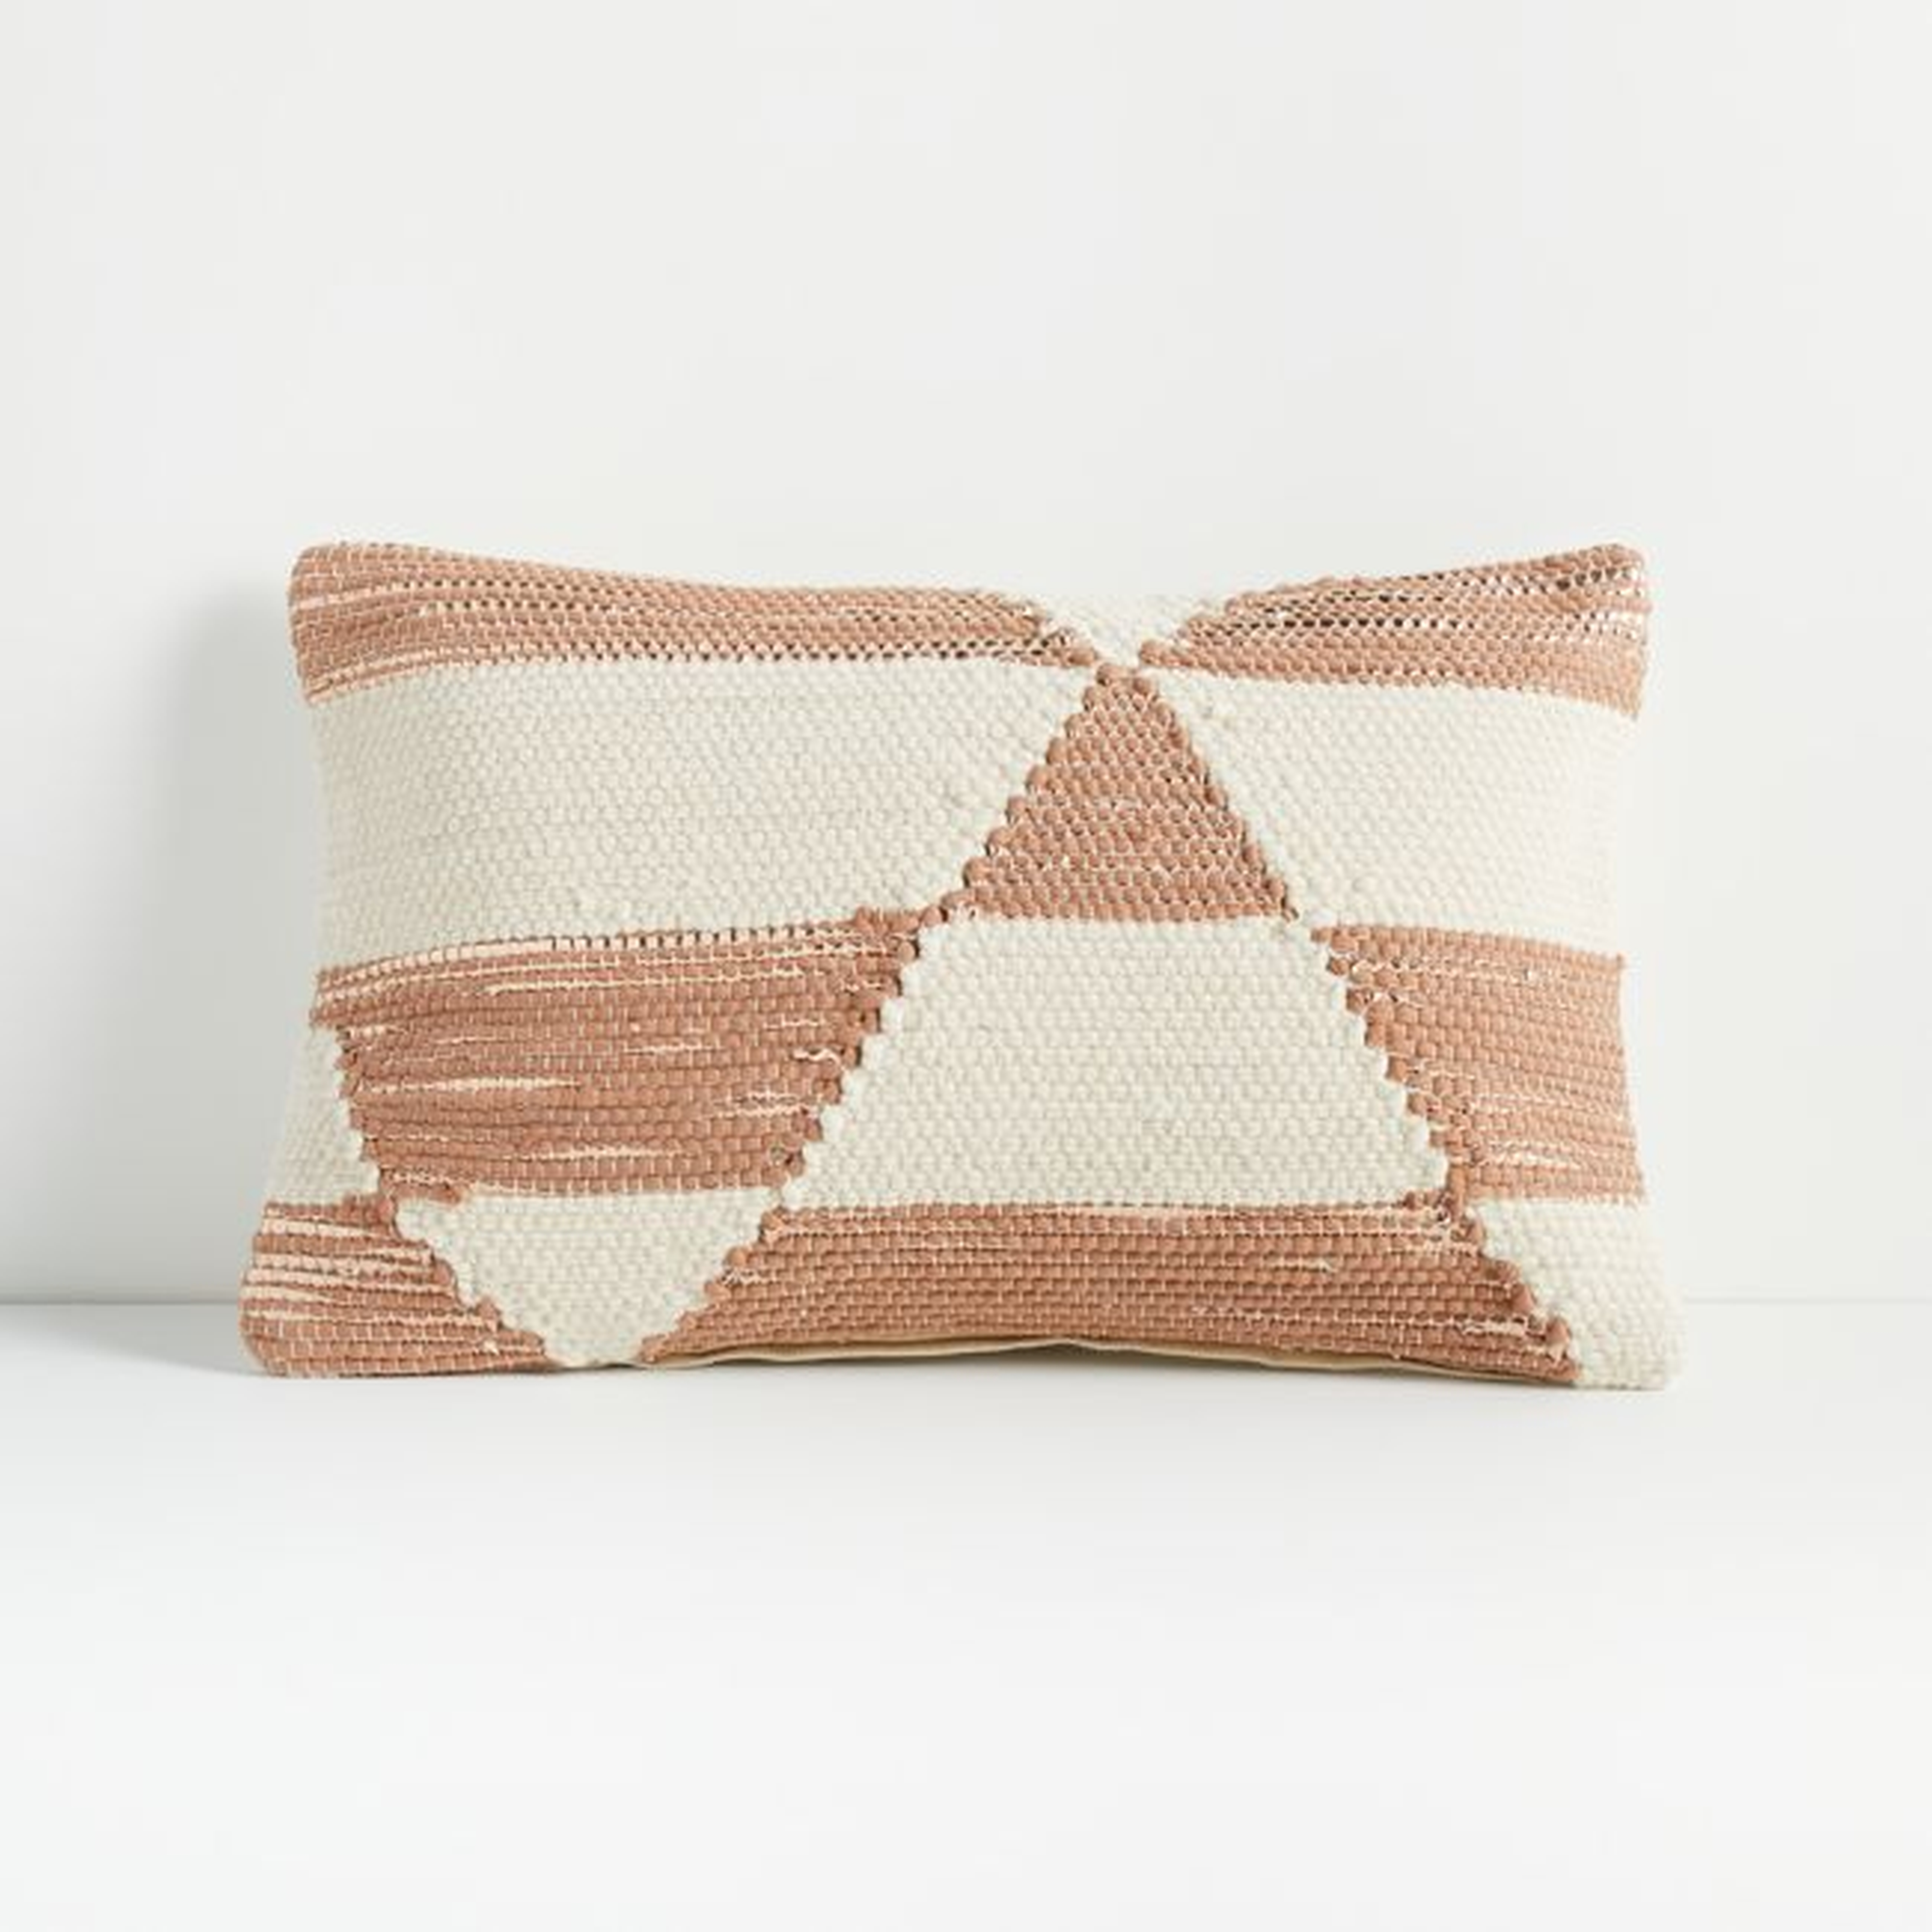 Kyson White and Peach Pillow 16"x24" - Crate and Barrel